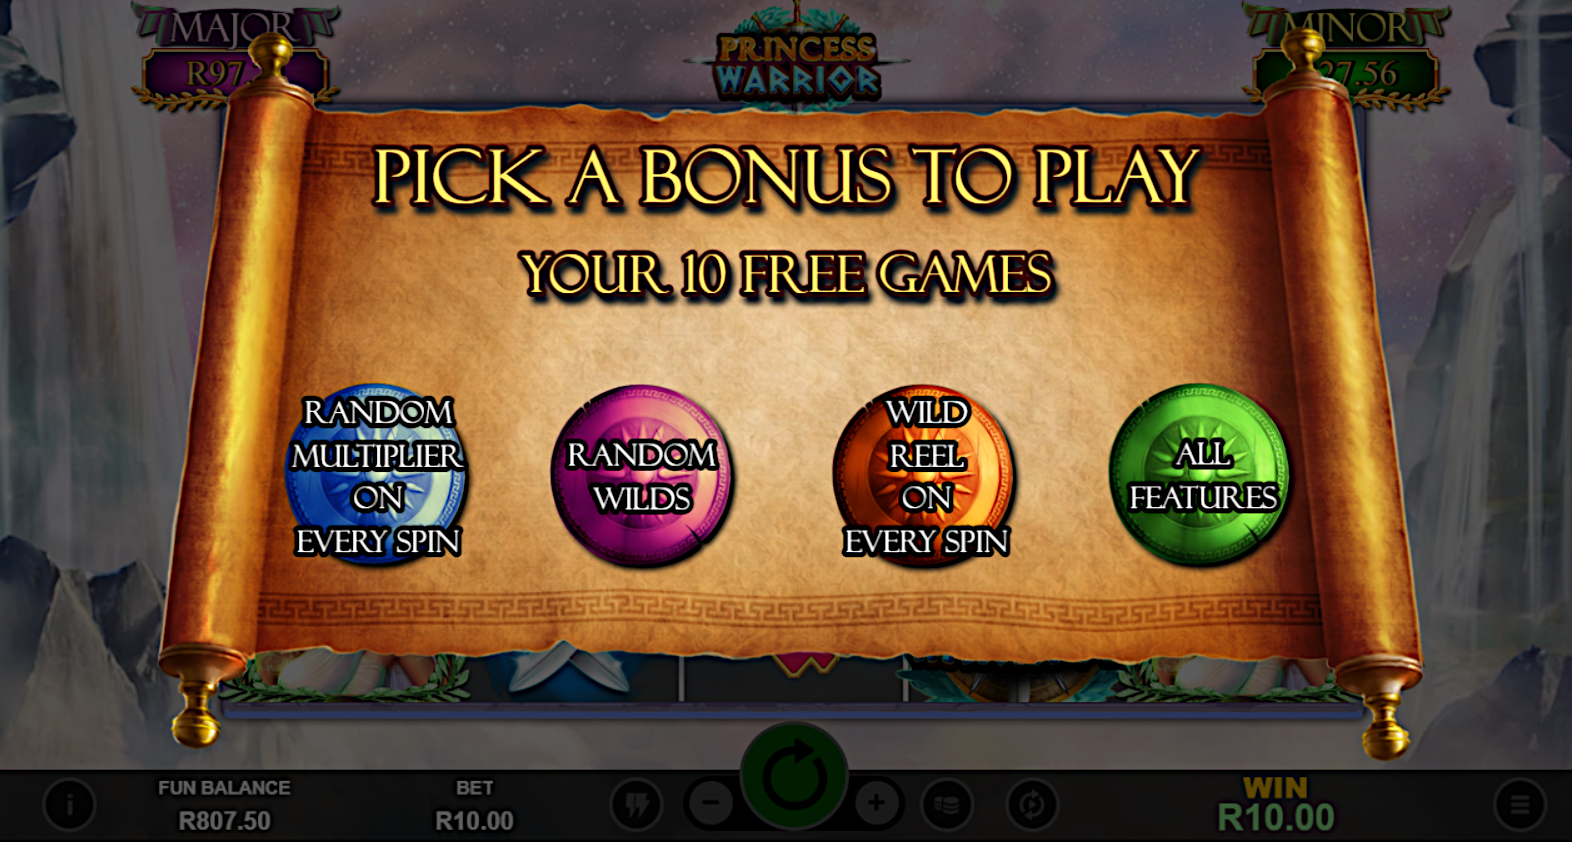 Princess Warrior slot at Punt Casino has stacks of bonus features to choose from.